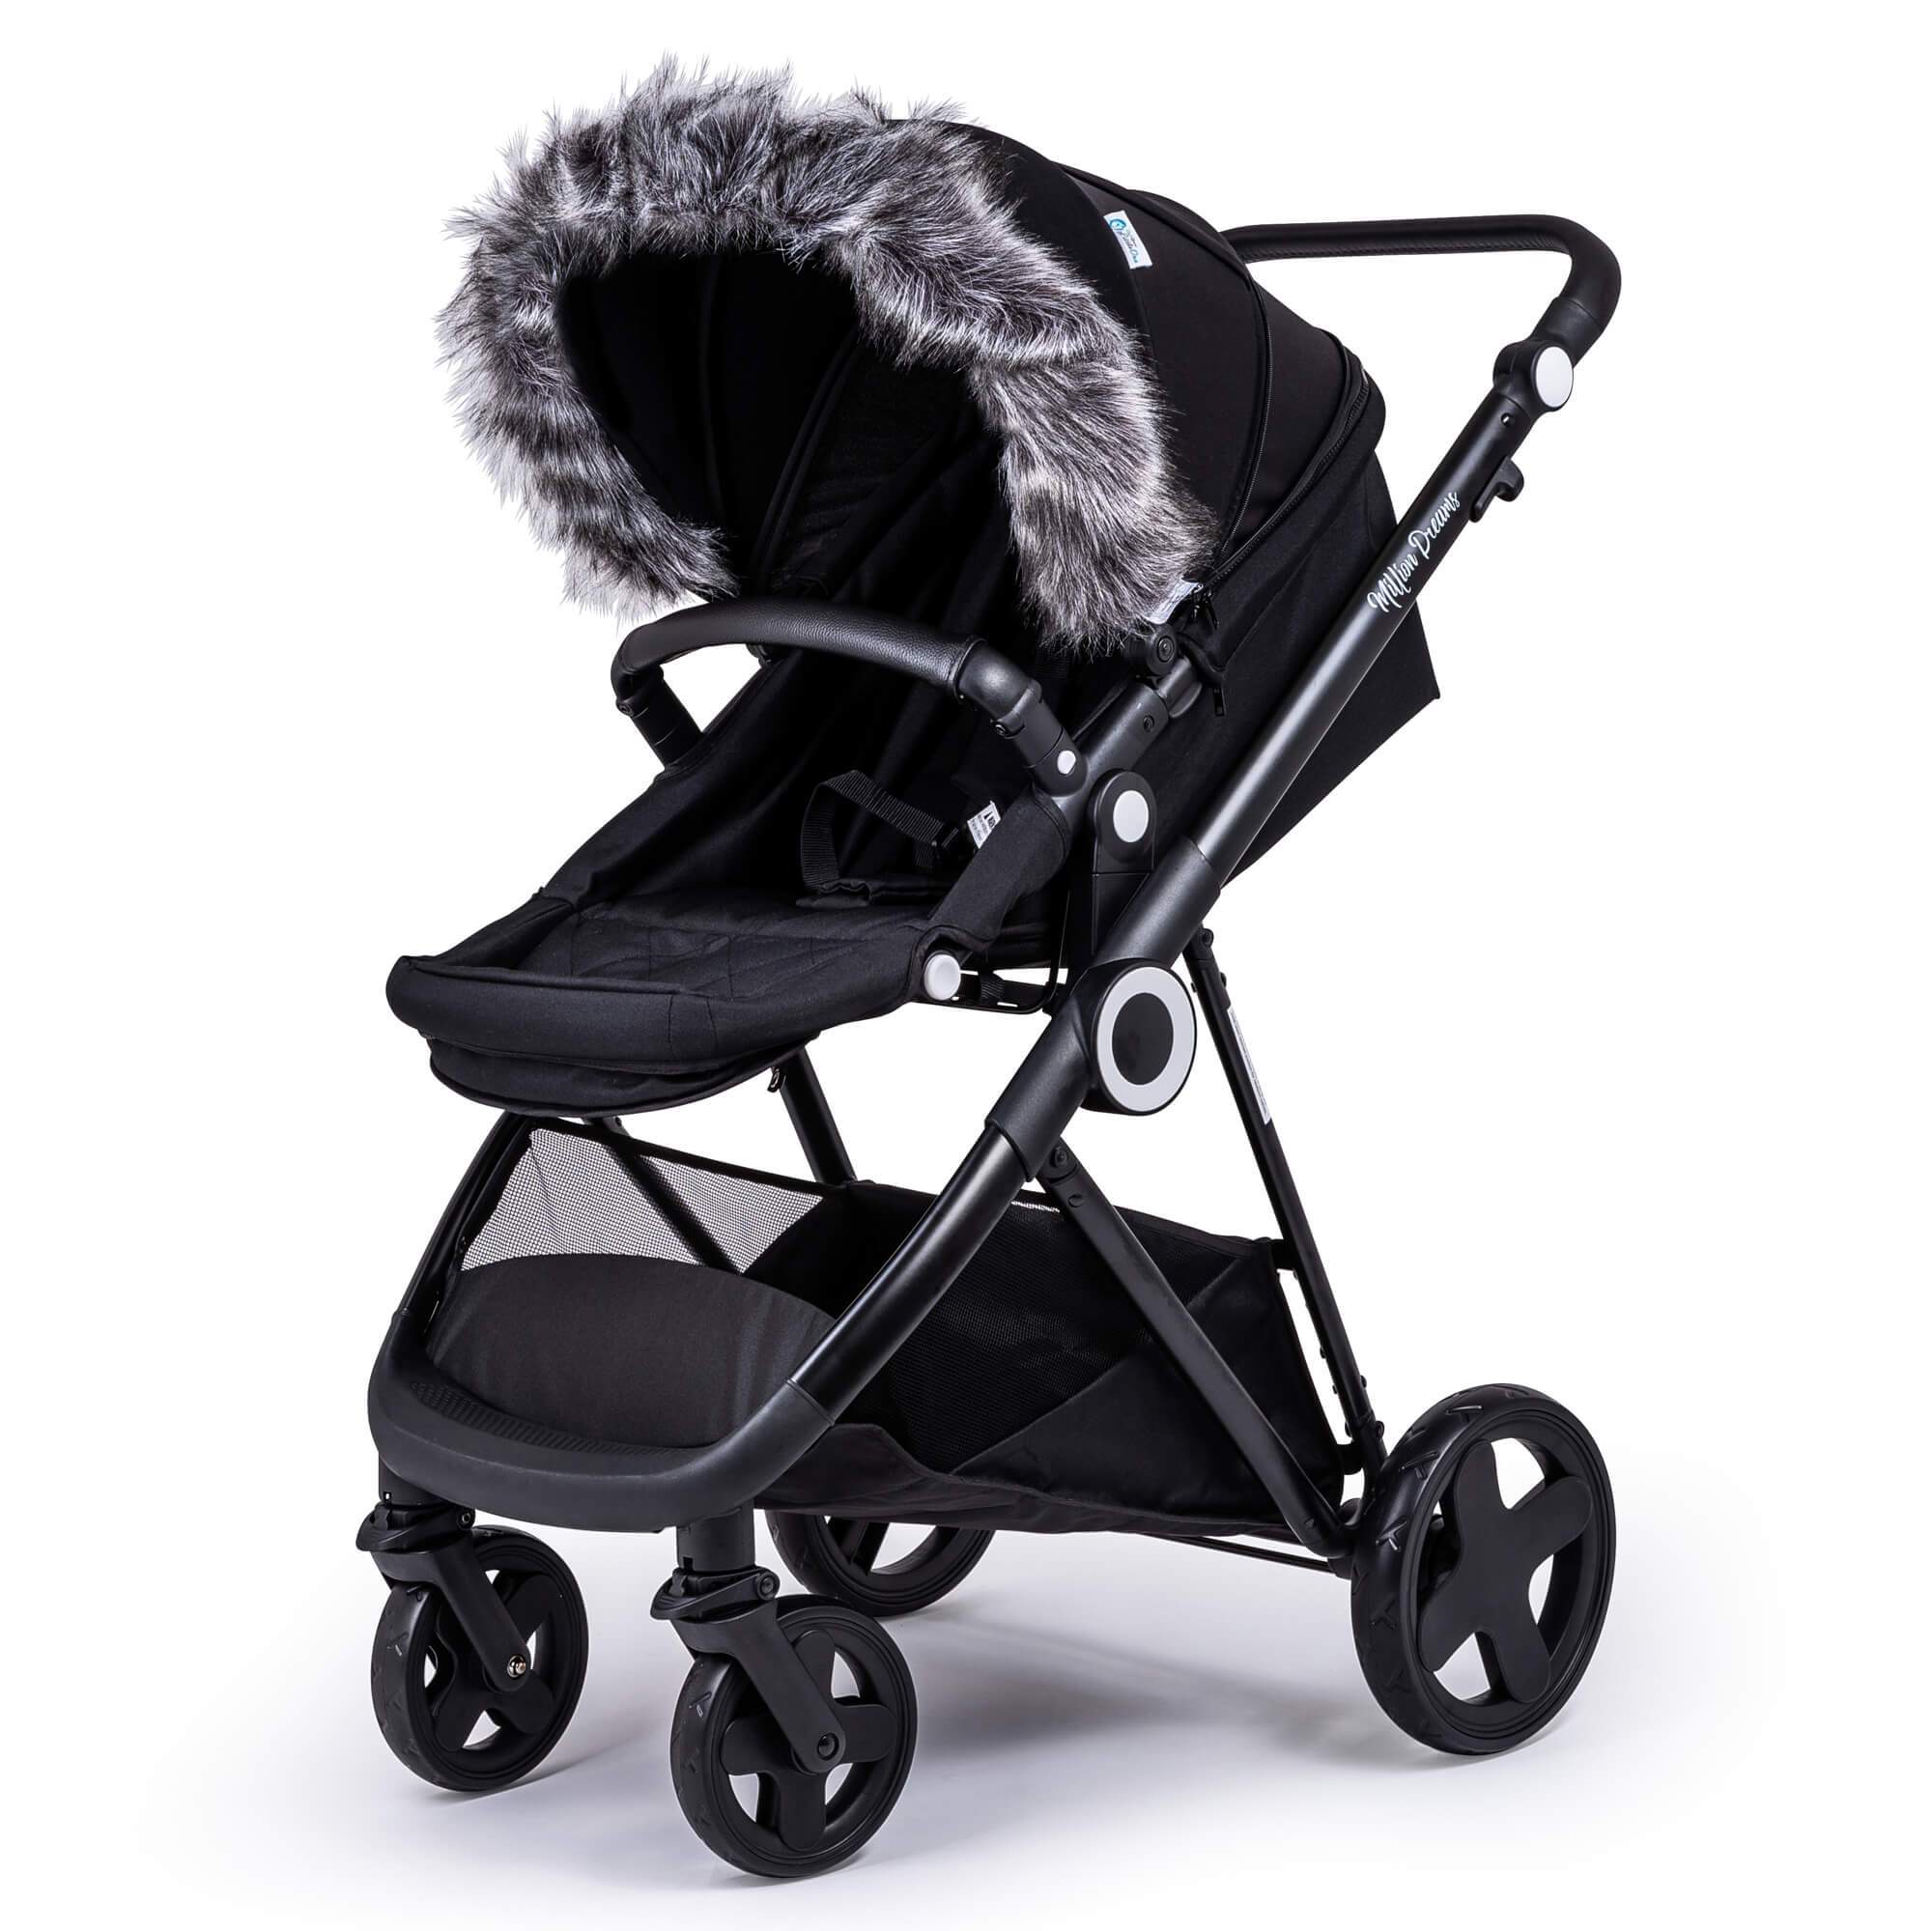 Pram Fur Hood Trim Attachment for Pushchair Compatible with Jane - Dark Grey / Fits All Models | For Your Little One